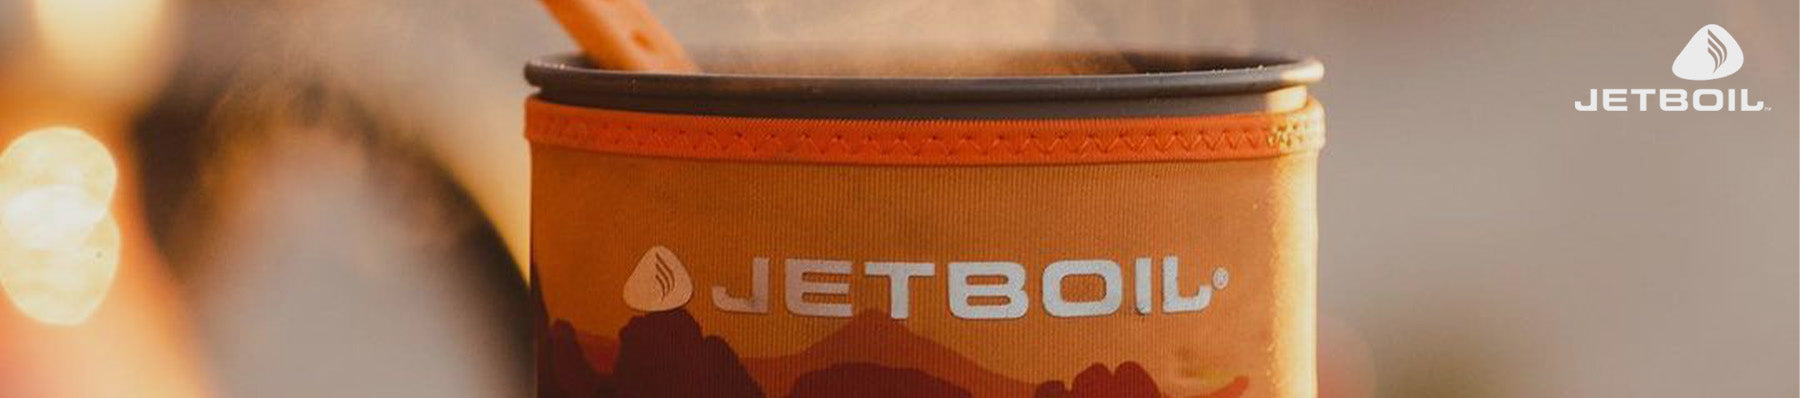 Shop Jetboil online at Outdoor Action